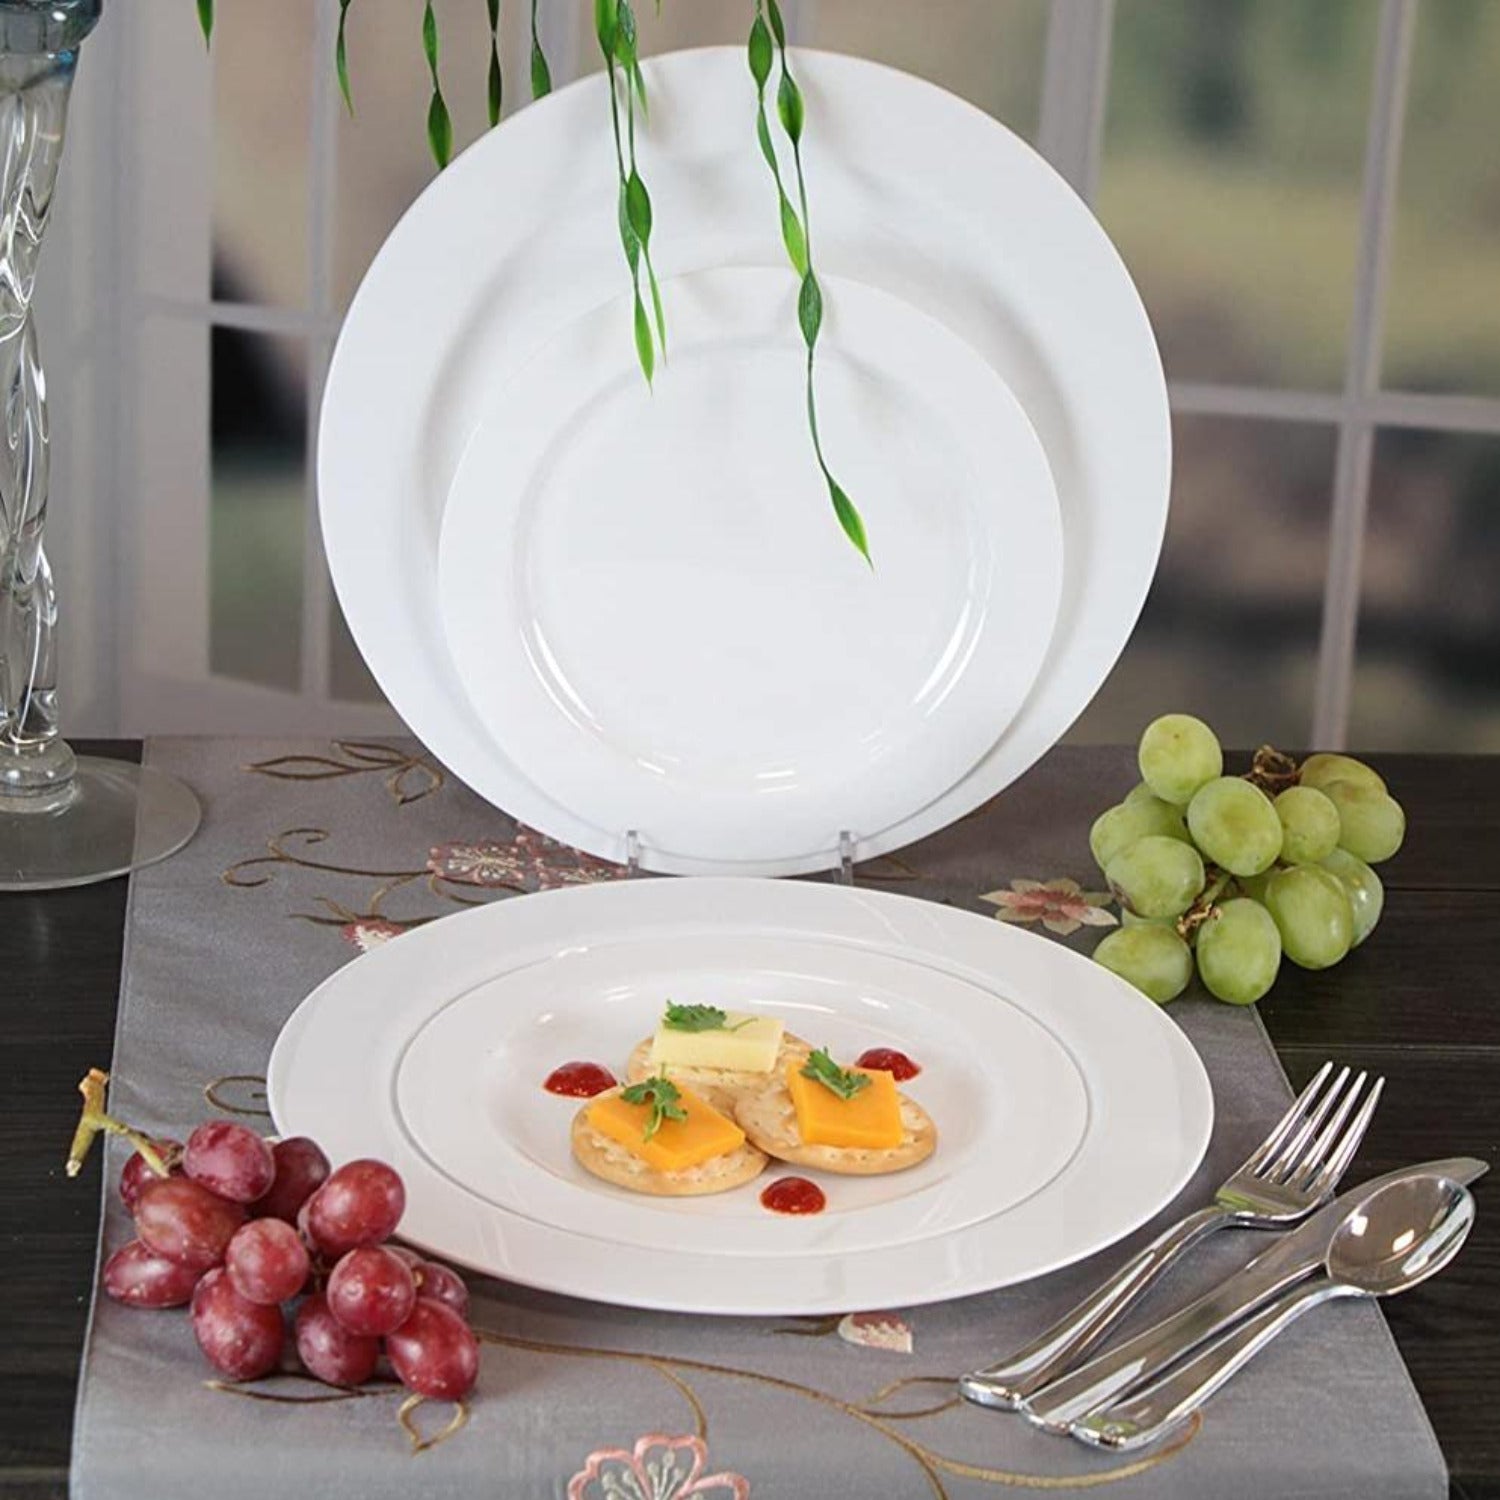 "BULK" Magnificence Heavy weight Plastic 7.25" Salad Plate Value pack Pearl White Plastic Plates Lillian Tablesettings   